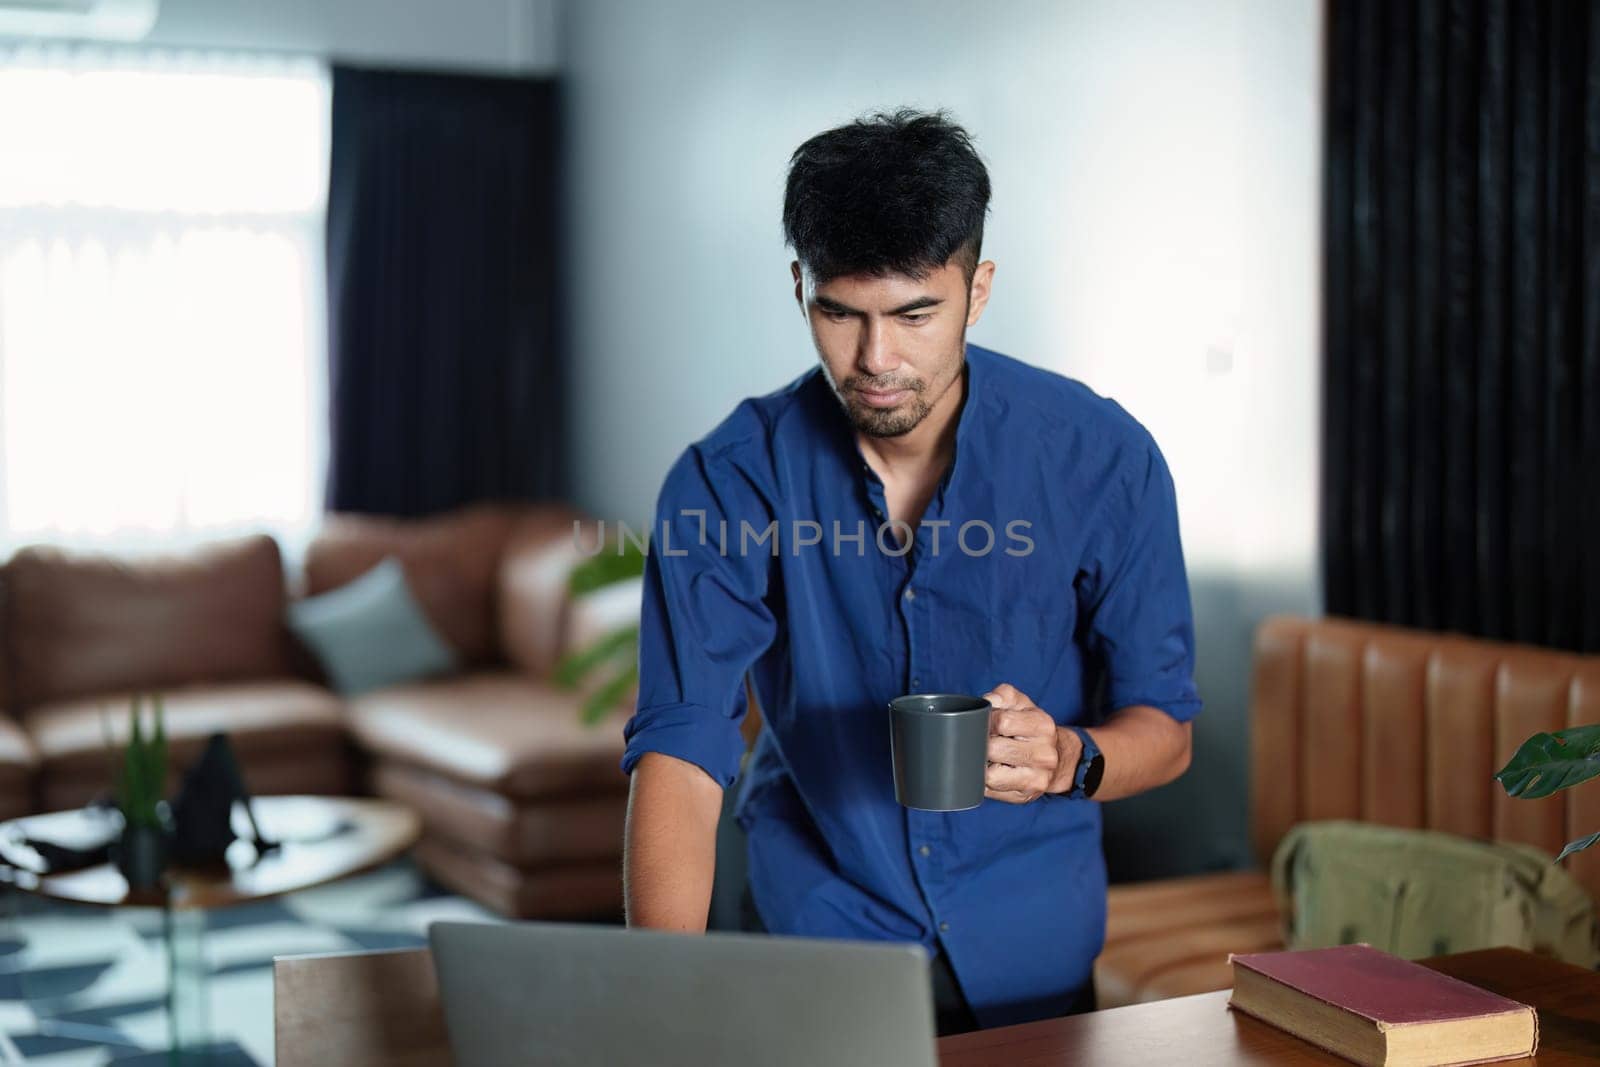 Portrait of an Asian man working on a computer and drinking coffee.